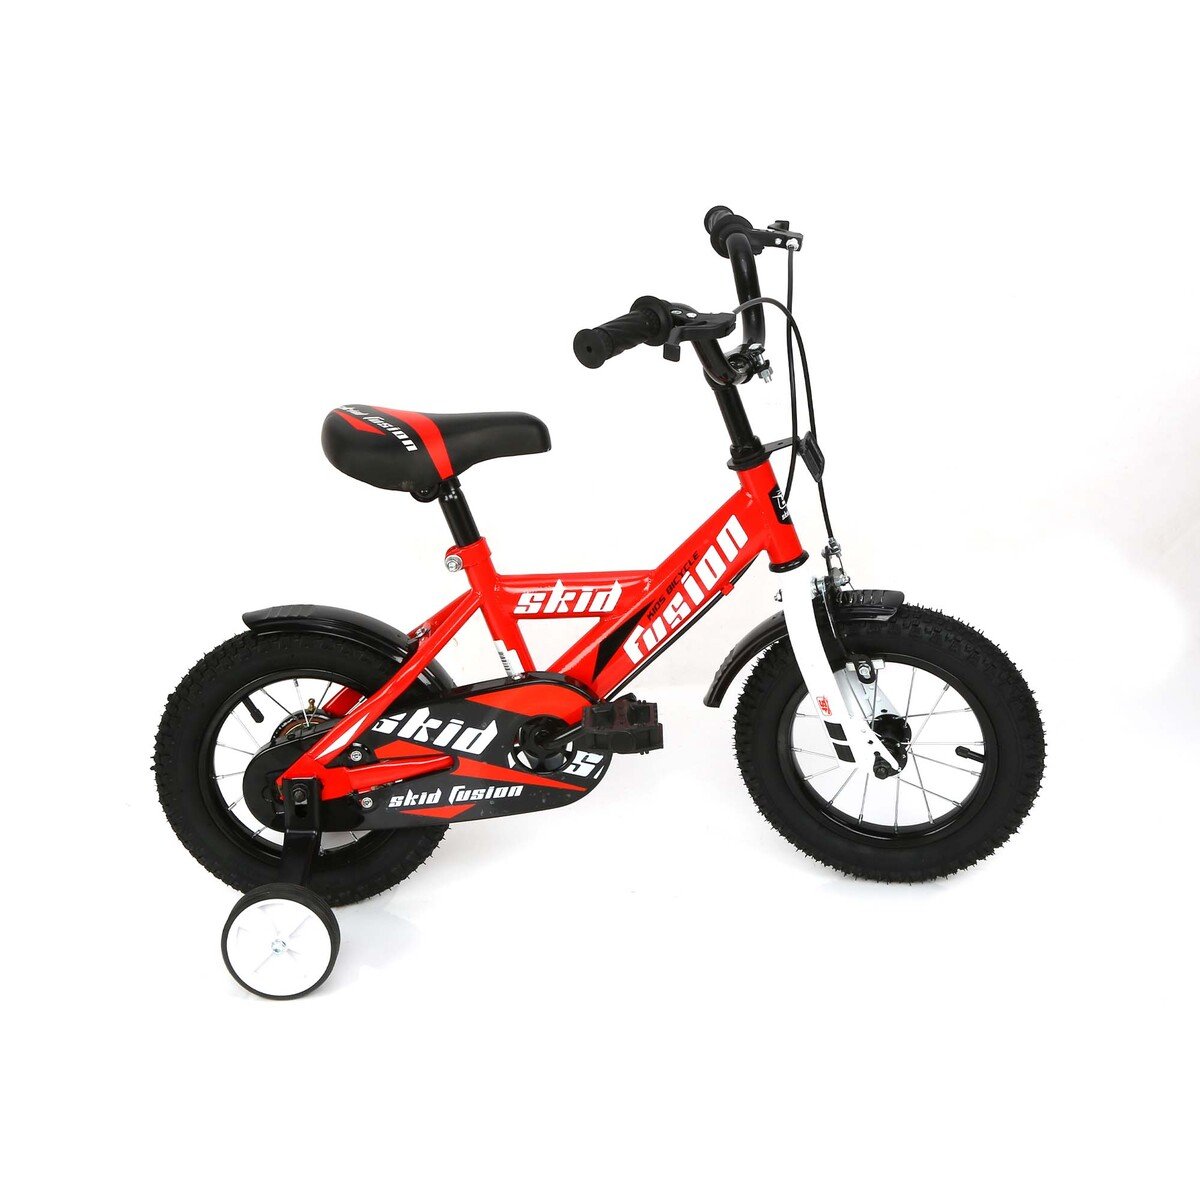 Skid Fusion Kids Bicycle 12" KX10-12 Red